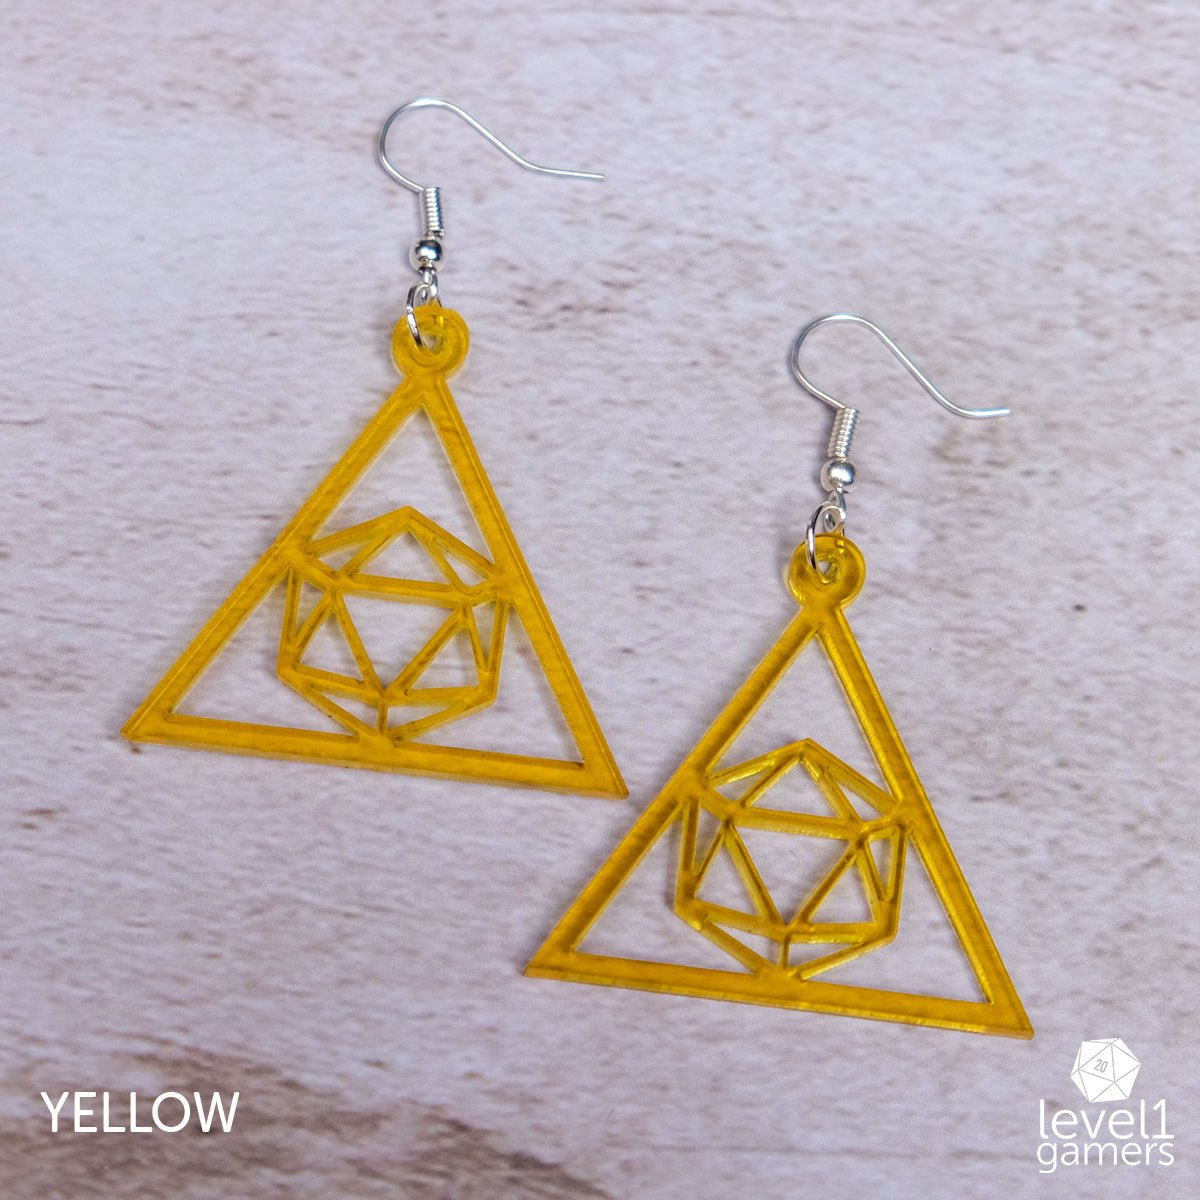 D20 Triangle Acrylic Earrings  Level 1 Gamers Pendant Yellow 